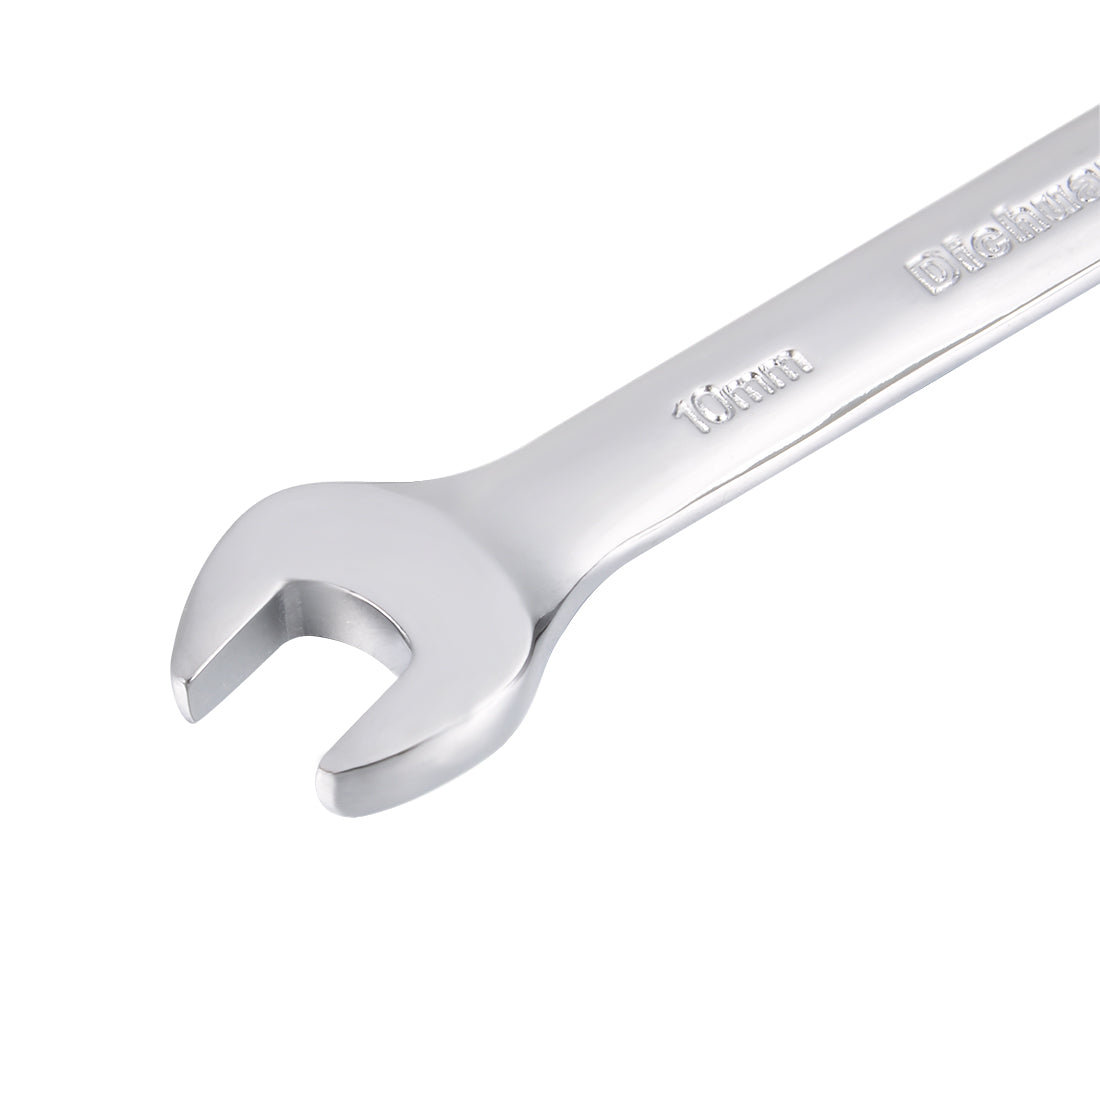 uxcell Uxcell Metric 10mm 12-Point Box Open End Combination Wrench Chrome Finish, Cr-V